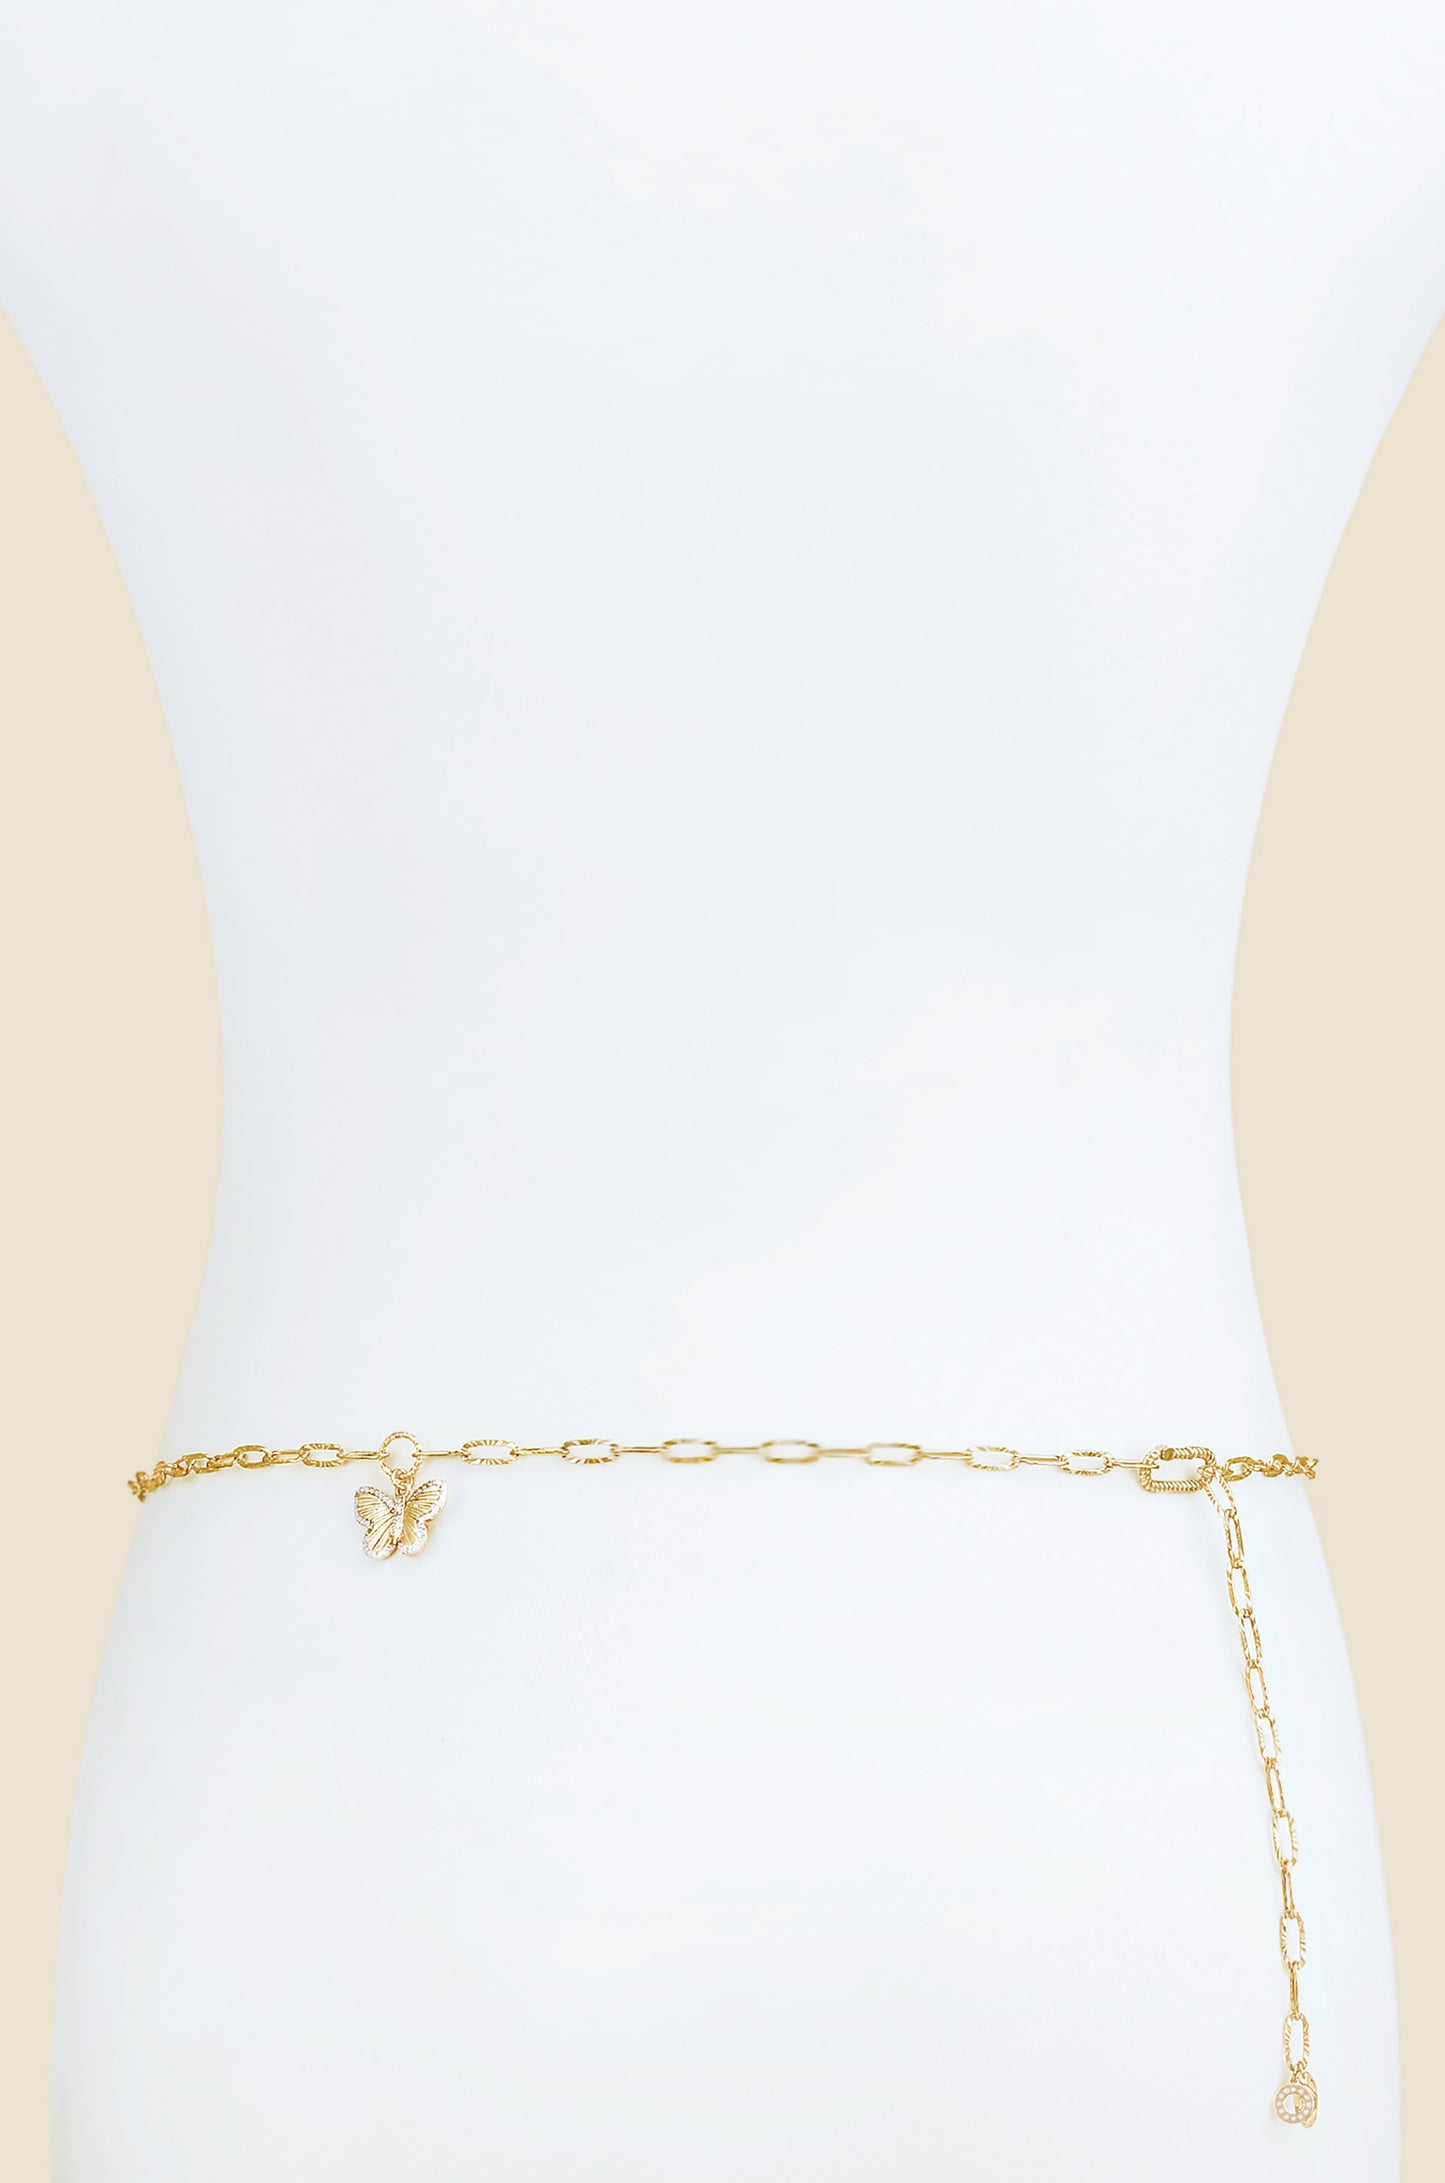 Simplicity Butterfly Belly Chain back